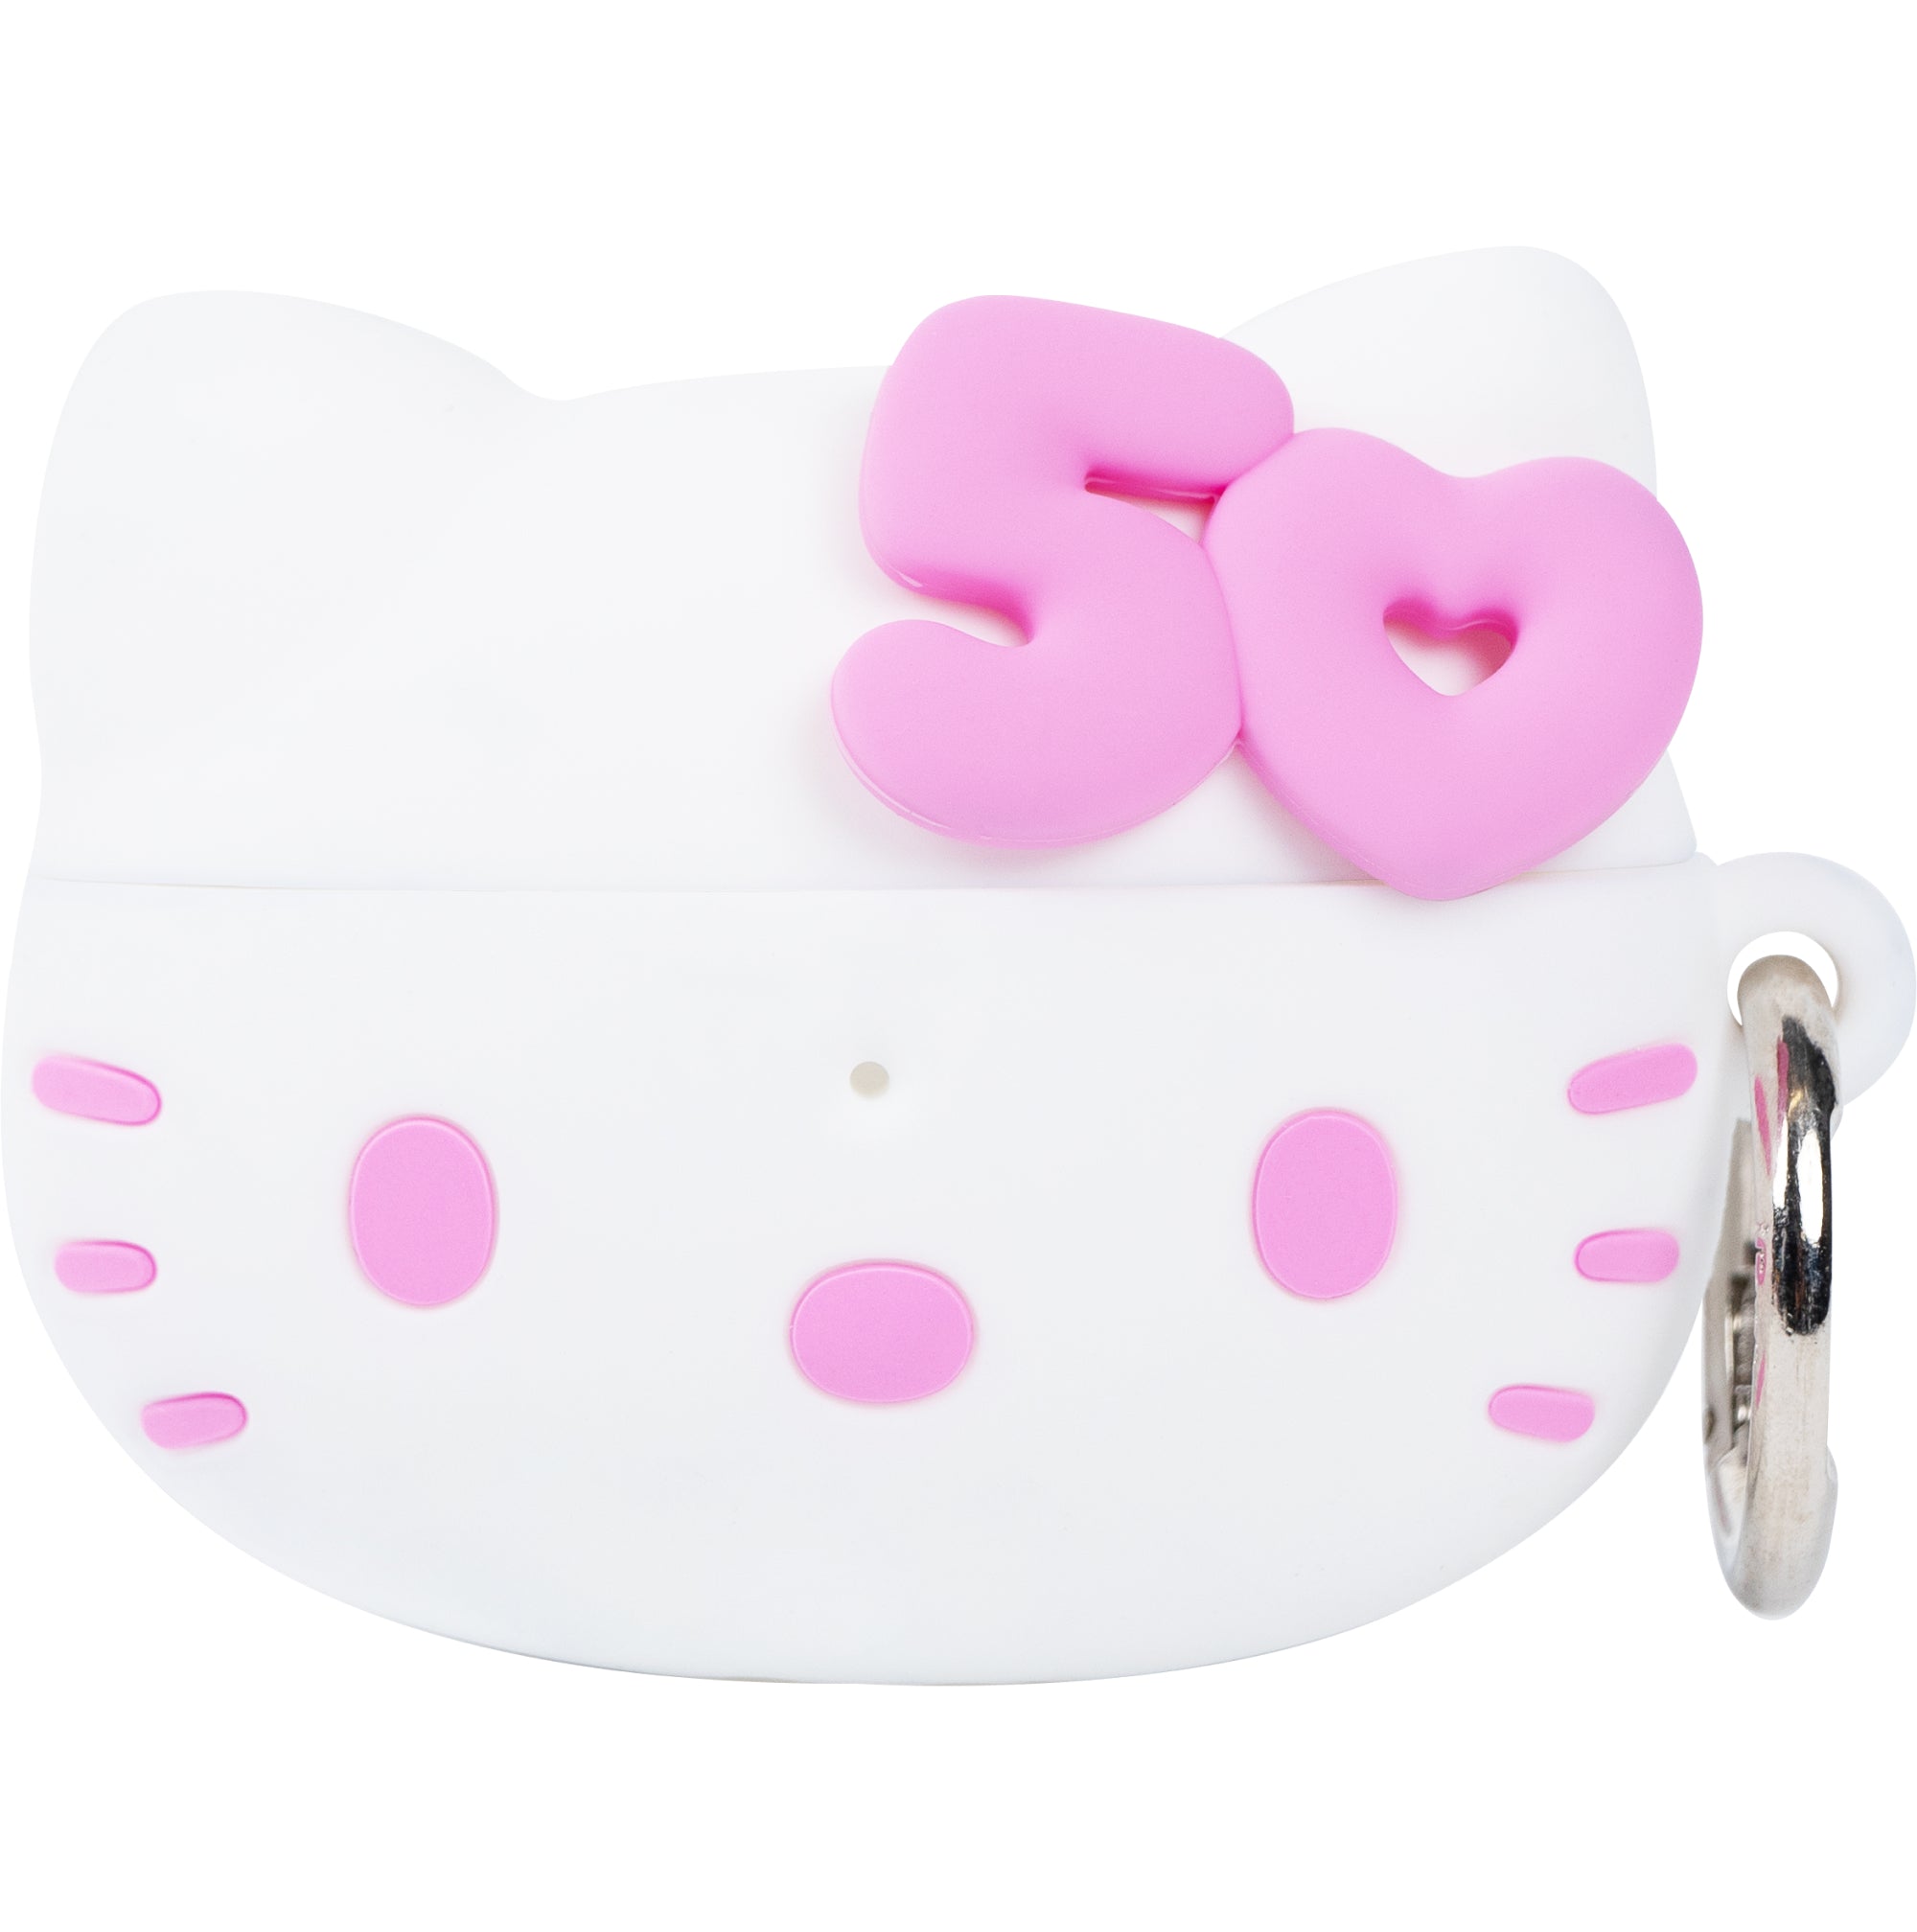 Hello Kitty 50th Anniversary AirPods Case AirPods Case Hamee.com - Hamee US AirPods Pro / Pro 2  